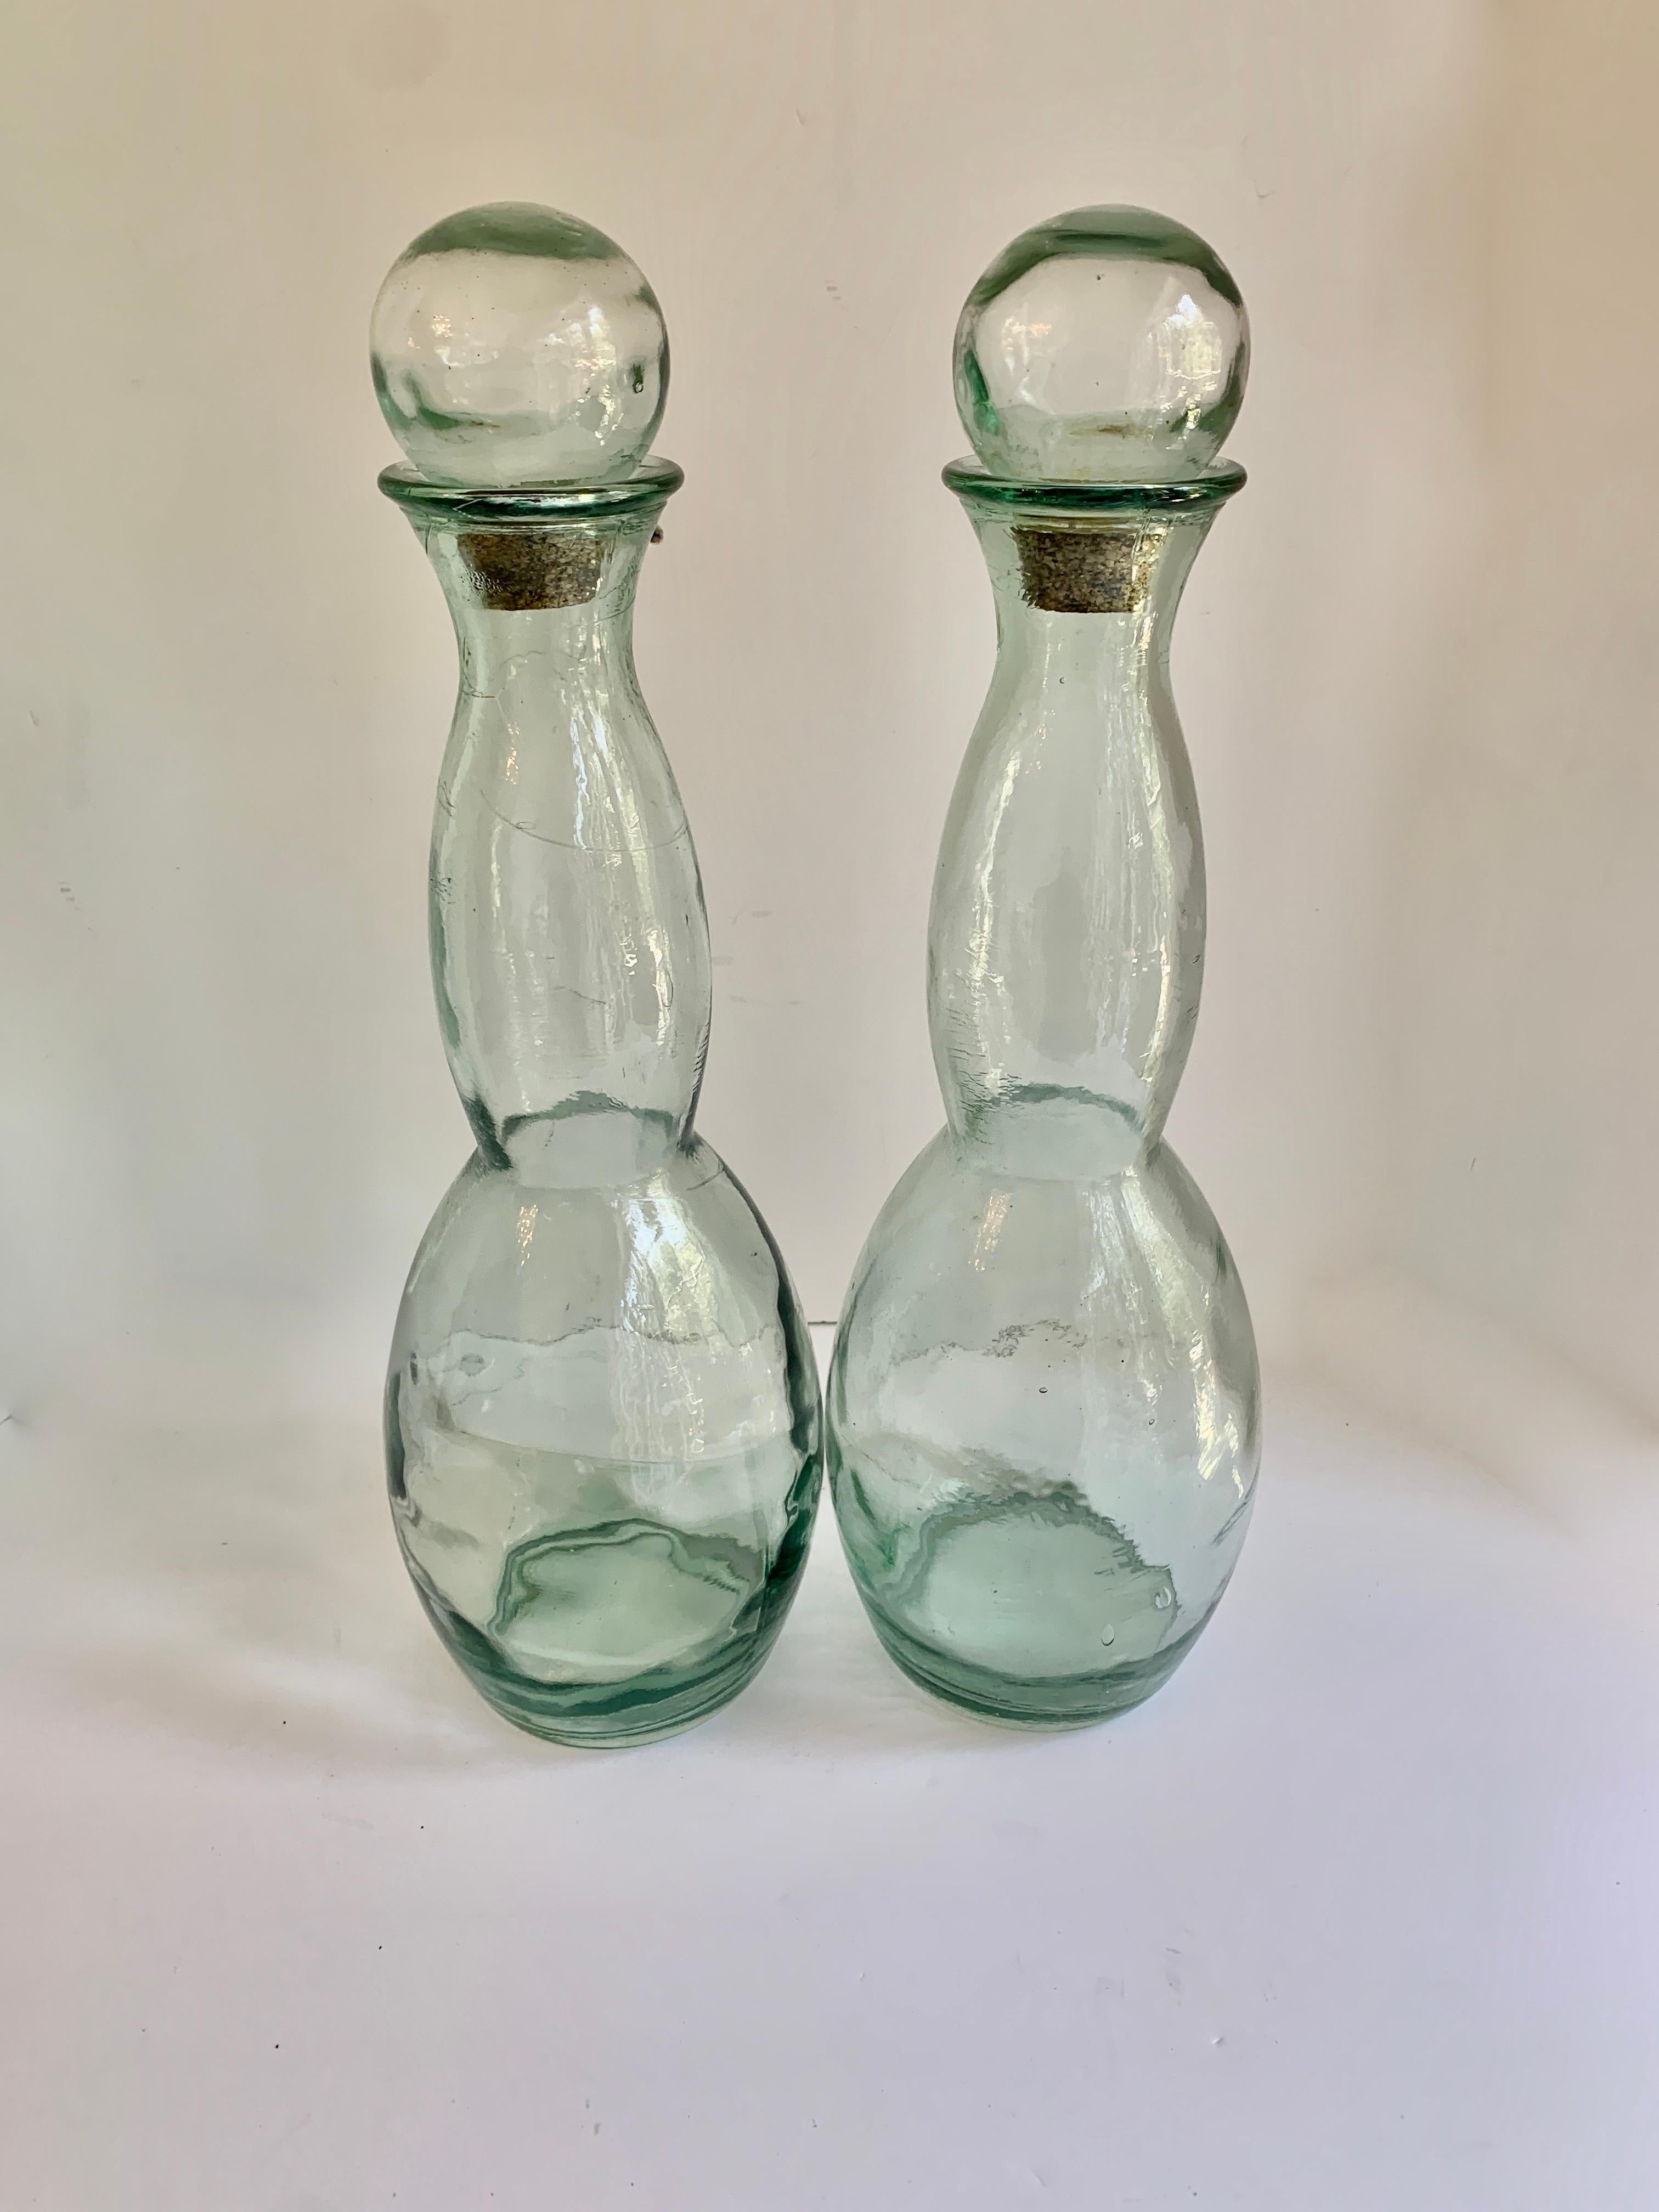 A pair of large hour glass shaped glass jars with Ball finial cork tops. A perfect companion to flank a large shelf or decorative wall in a utilitarian space. While wonderfully suited as a decorative pair, could certainly serve as a practical